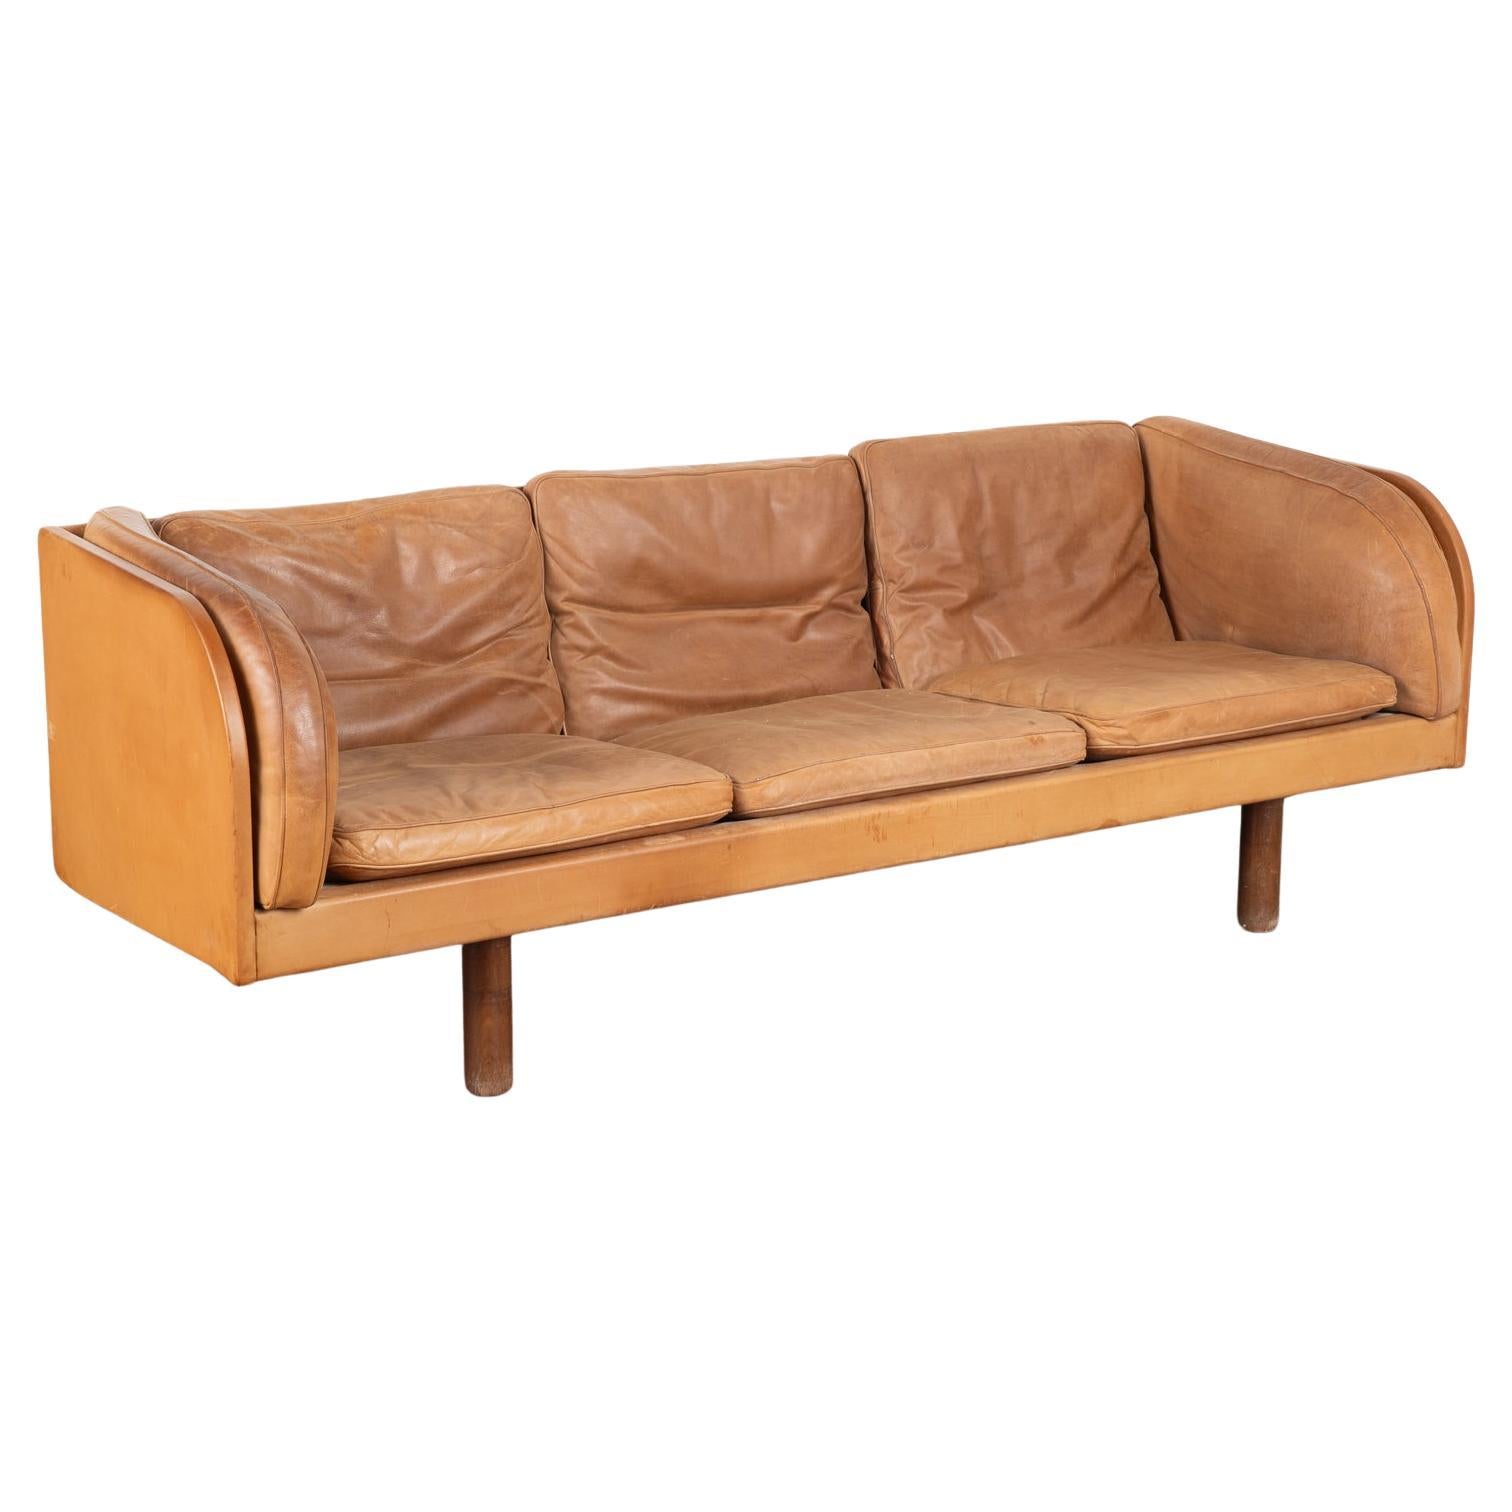 Mid Century Modern Three Seat Sofa With Curved Arms, Denmark circa 1960 For Sale